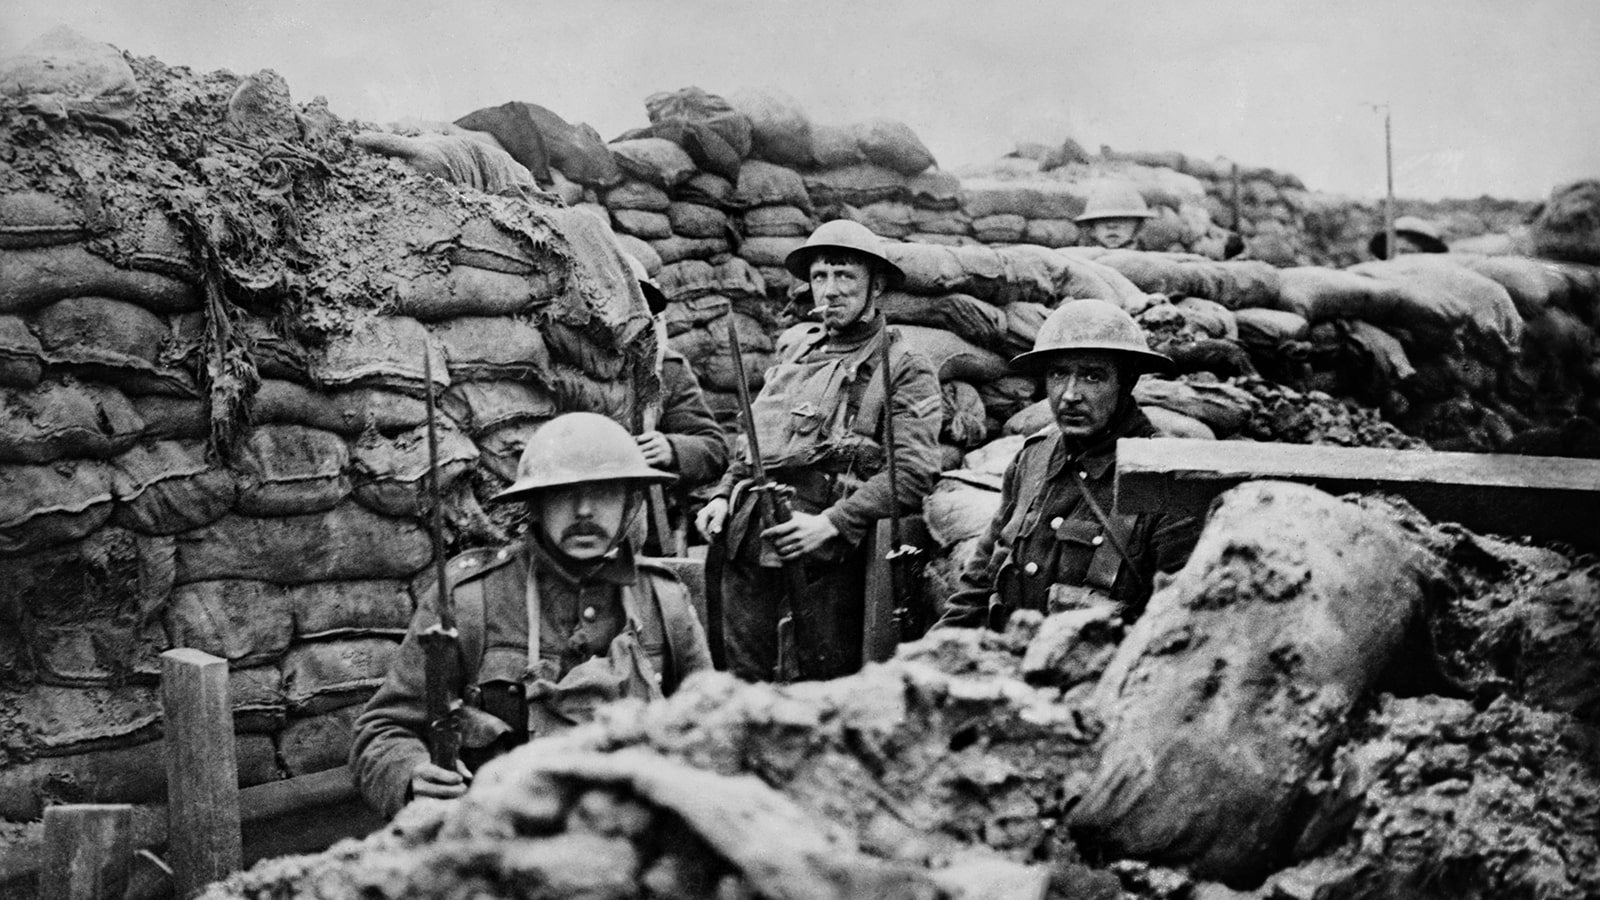 Black and white photograph of 3 WW1 soldiers in a trench